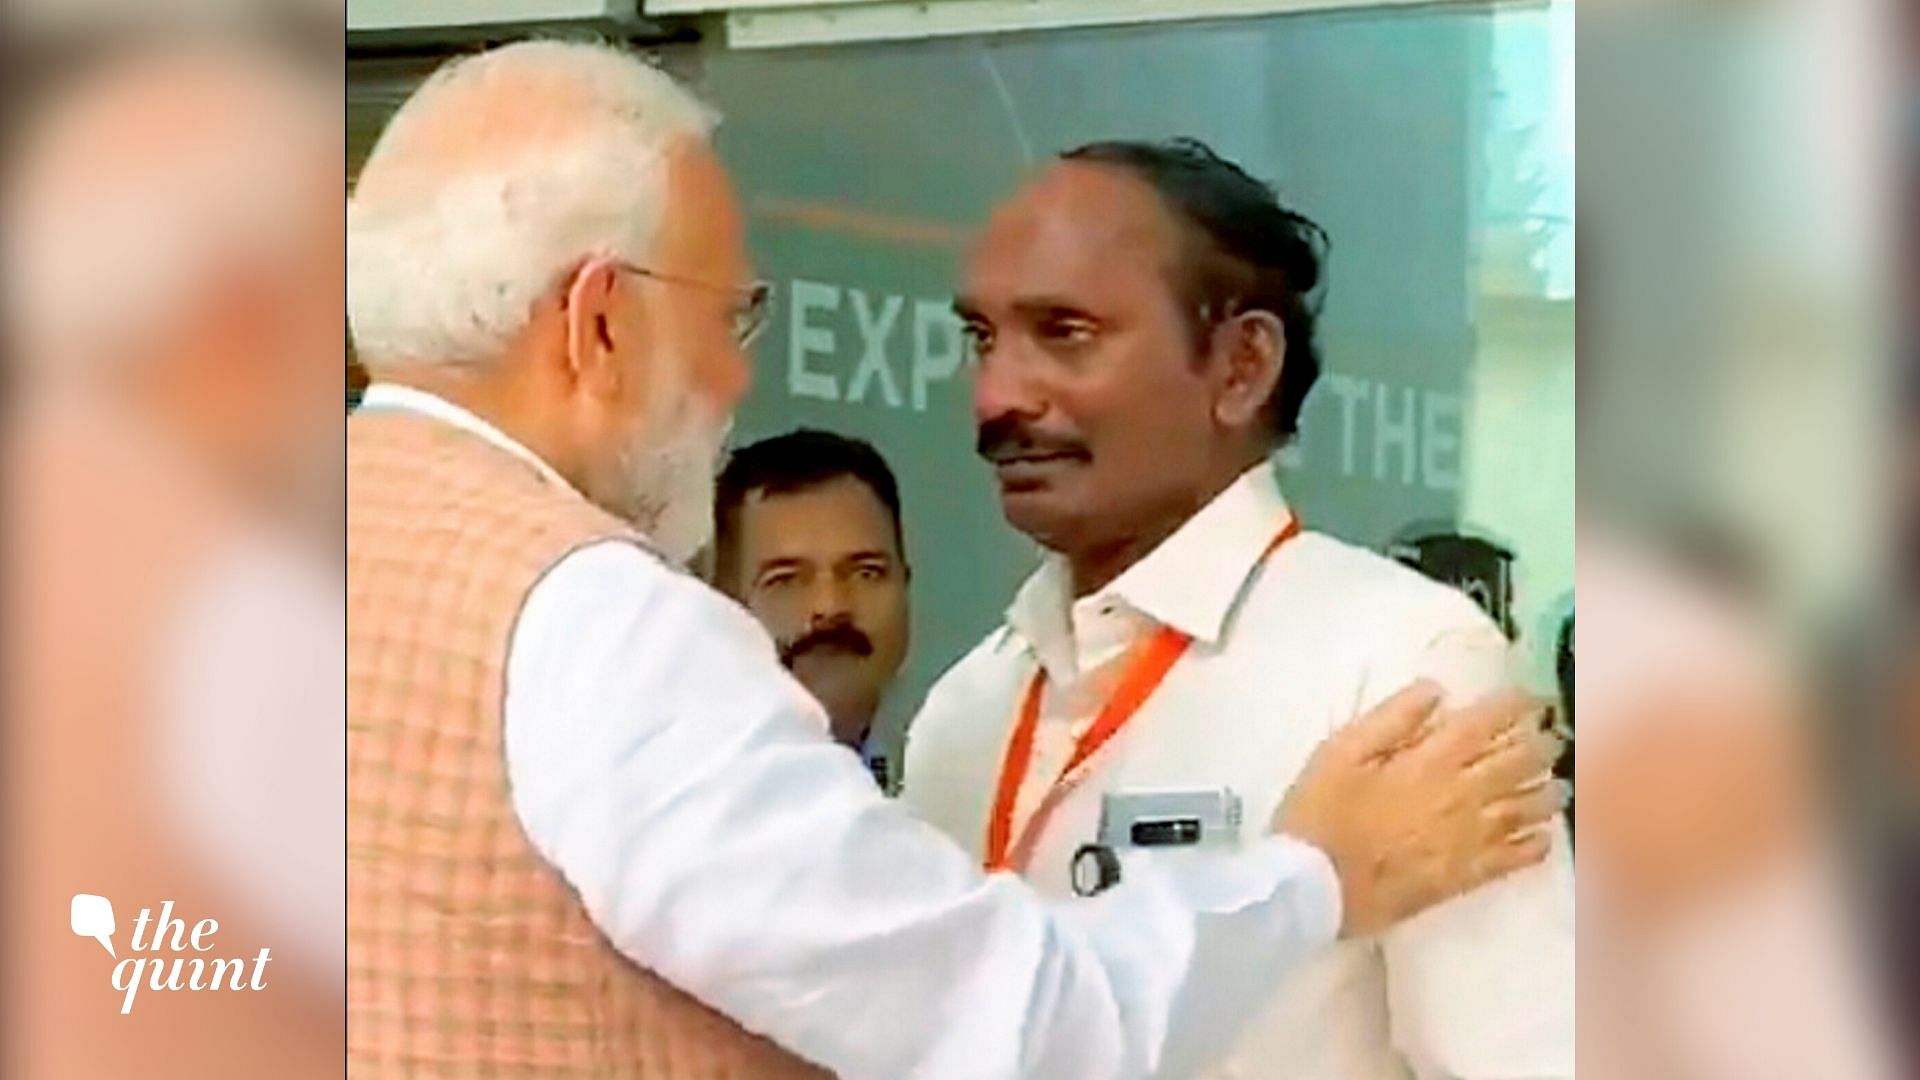 Prime Minister Narendra Modi consoles ISRO Chairperson Kailasavadivoo Sivan as he got emotional after the Vikram lander connection was lost.